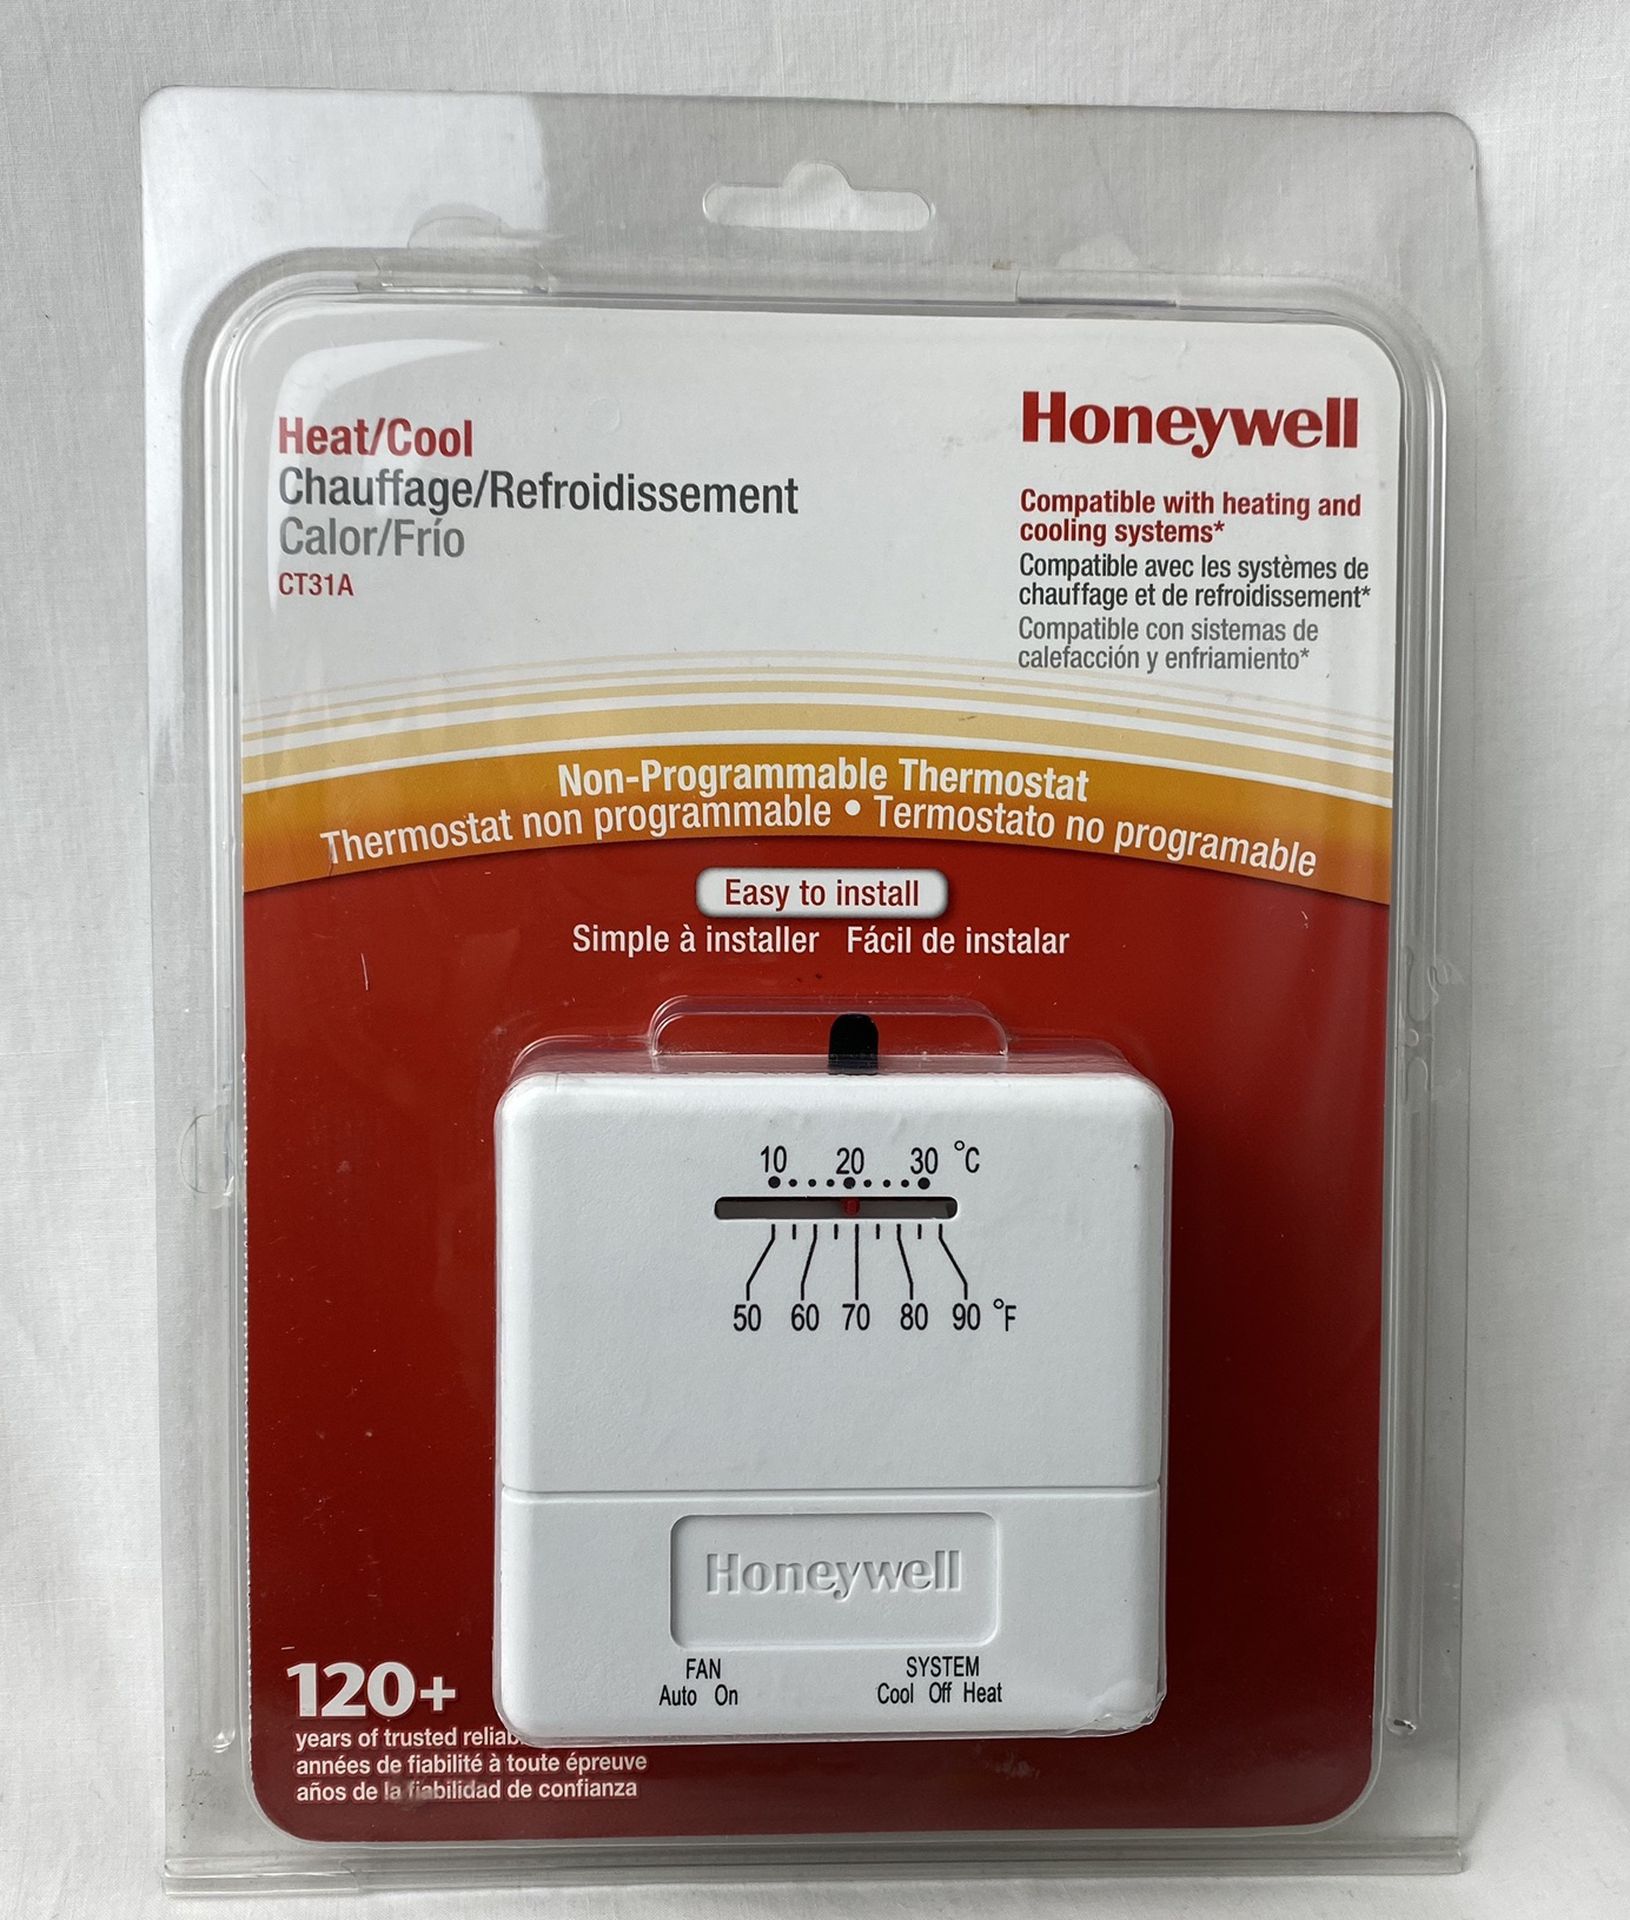 Honeywell CT31A 1003 Heat/Cool Non-Programmable Thermostat